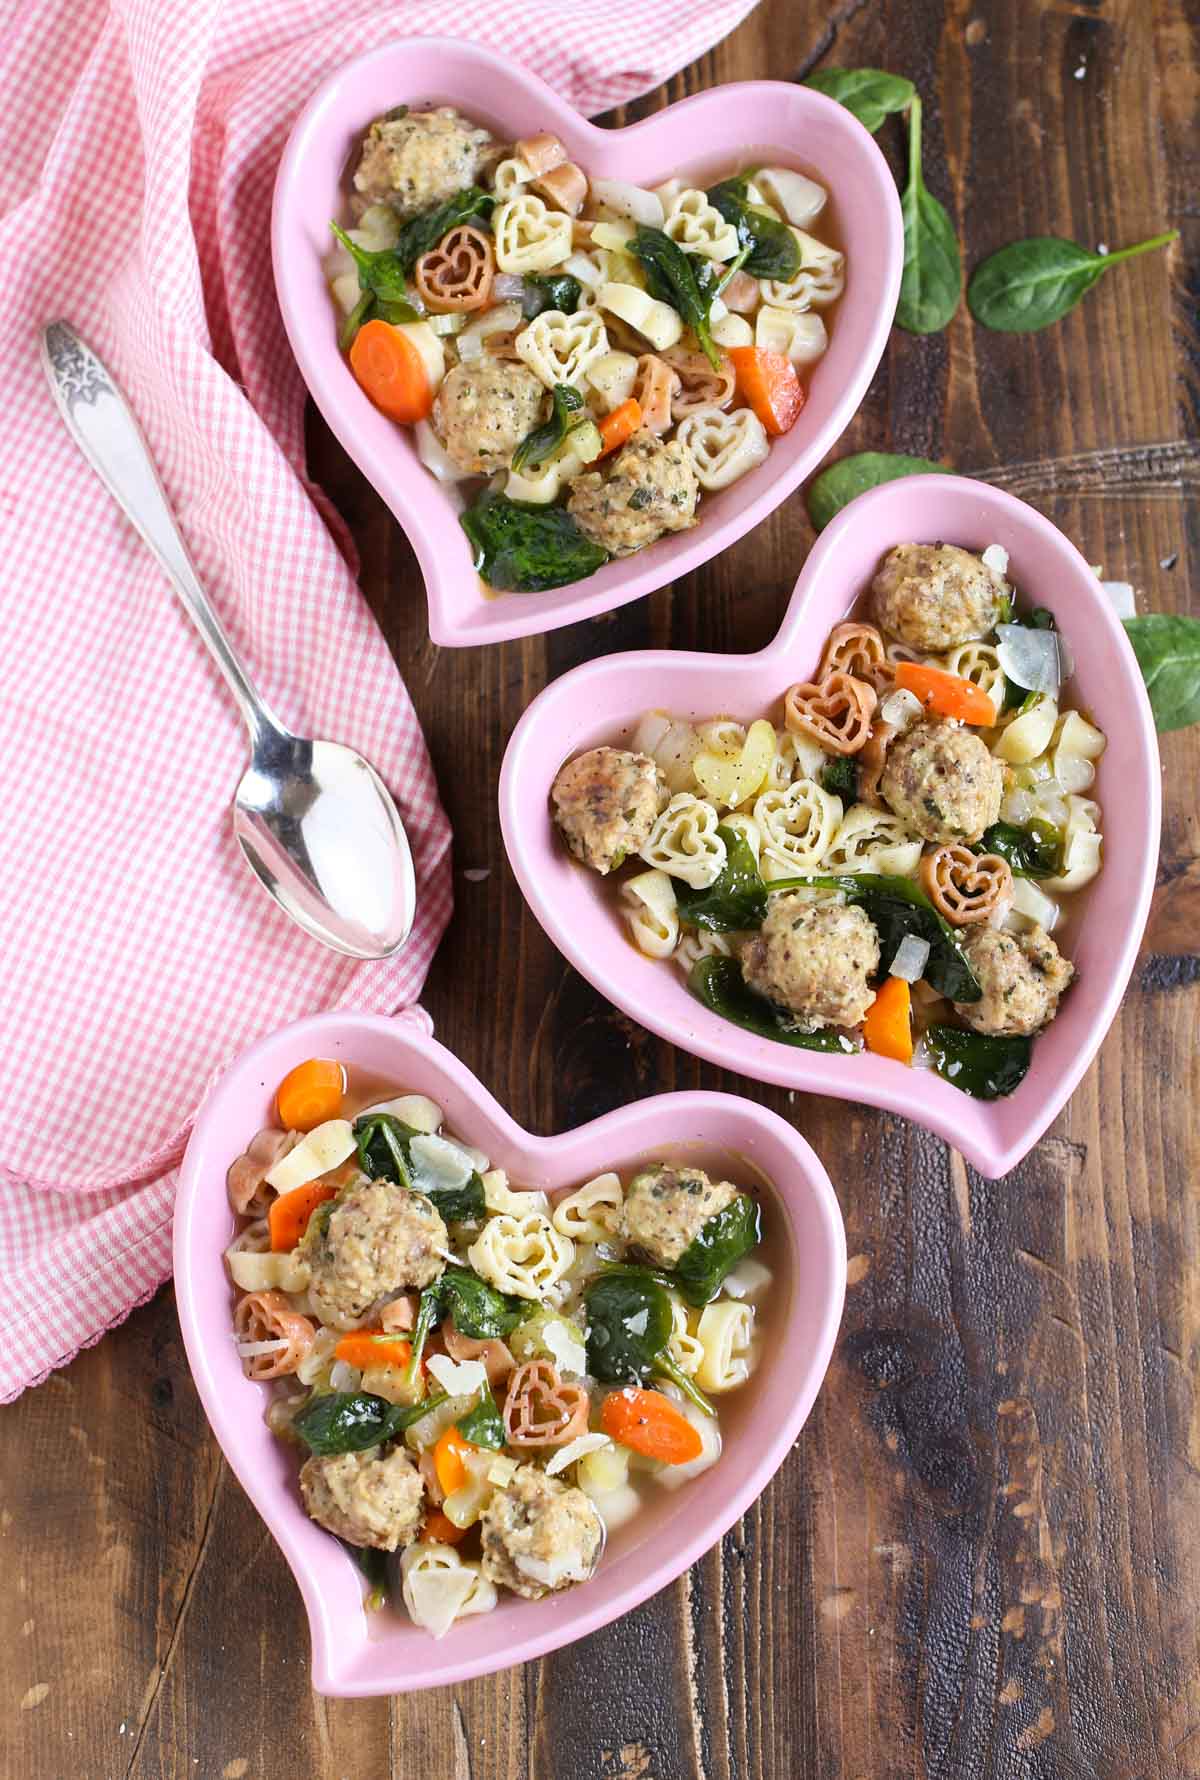 Italian Wedding Soup with Heart Pasta | Light & colorful made with Chicken Meatballs and Spinach | Delicious and fun with Heart Pasta | WorldofPastabilities.com